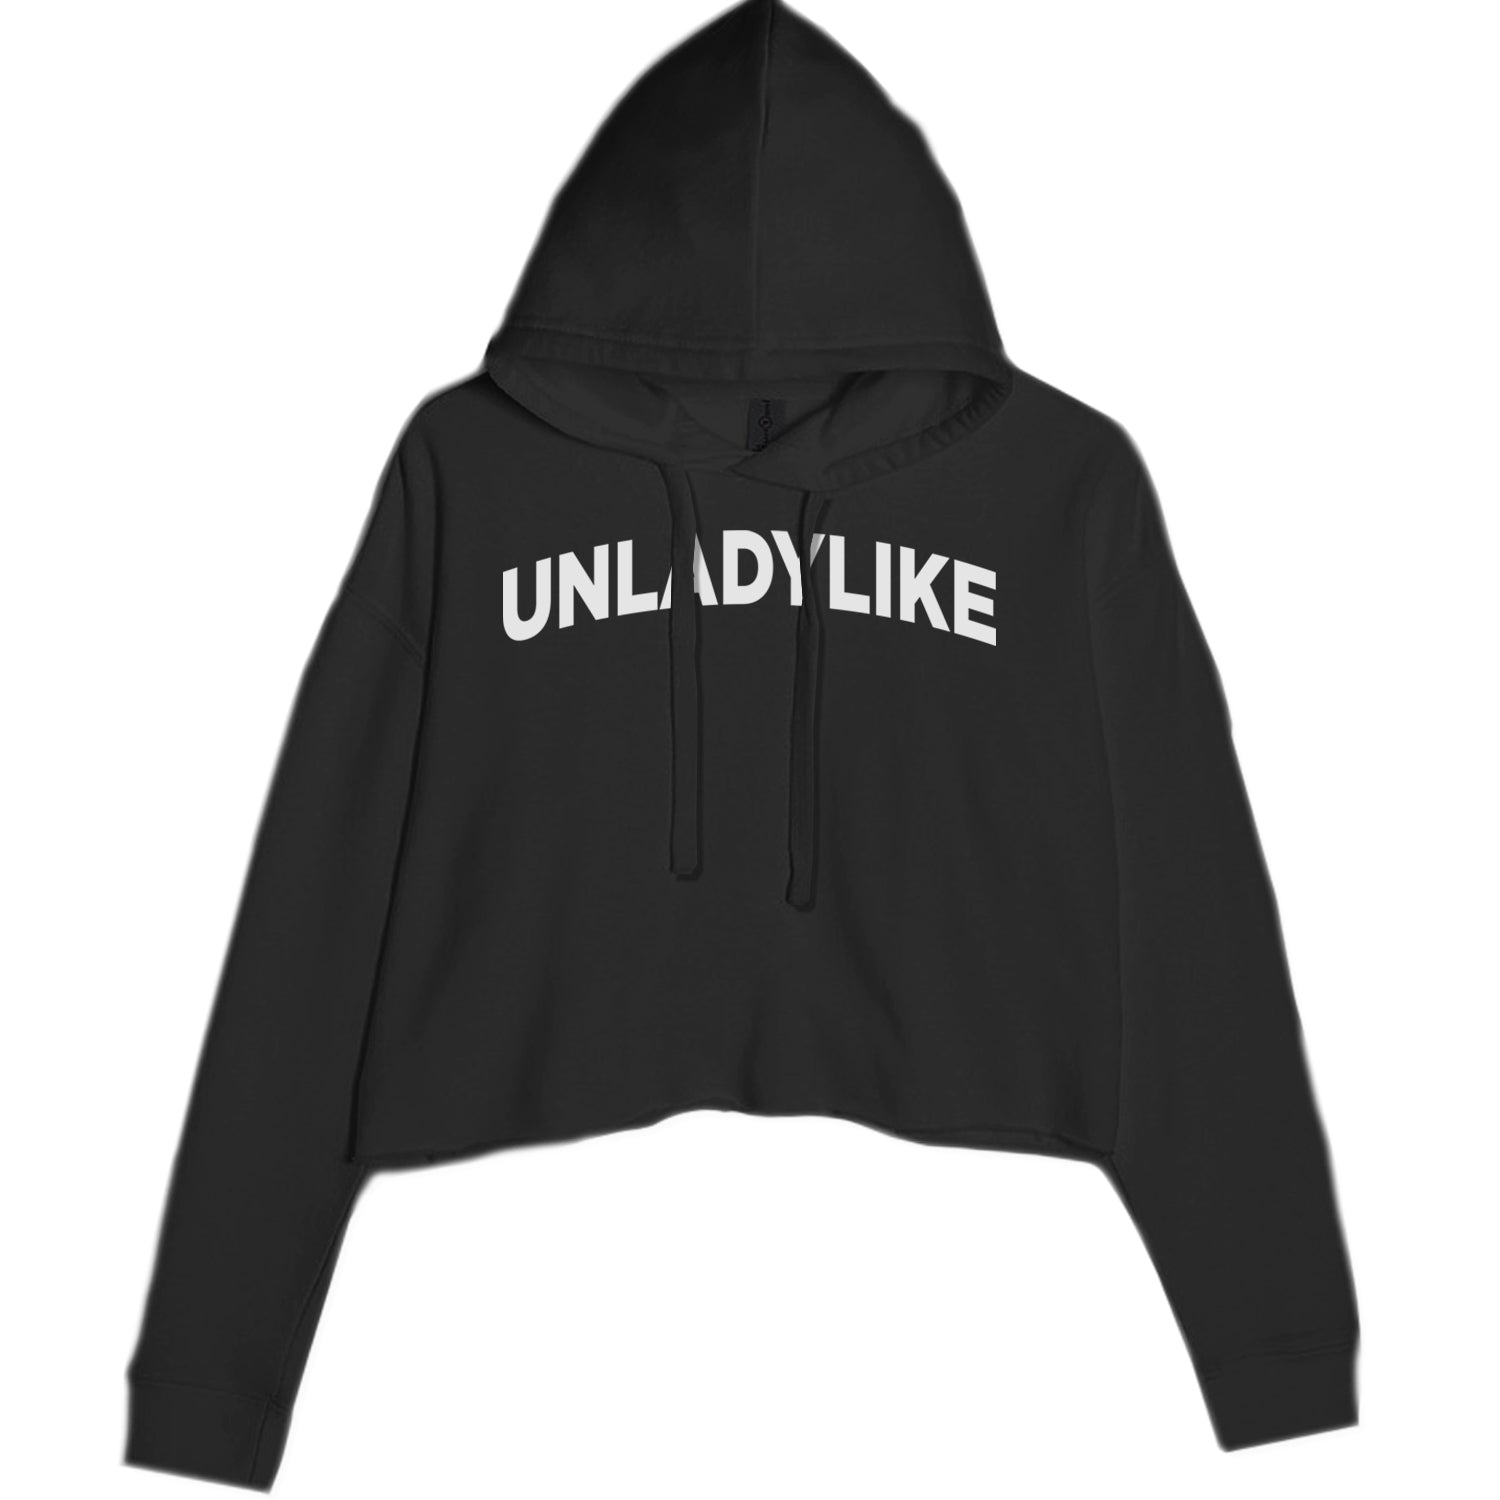 Unladylike Embrace Your Unique Strength Cropped Hoodie Sweatshirt